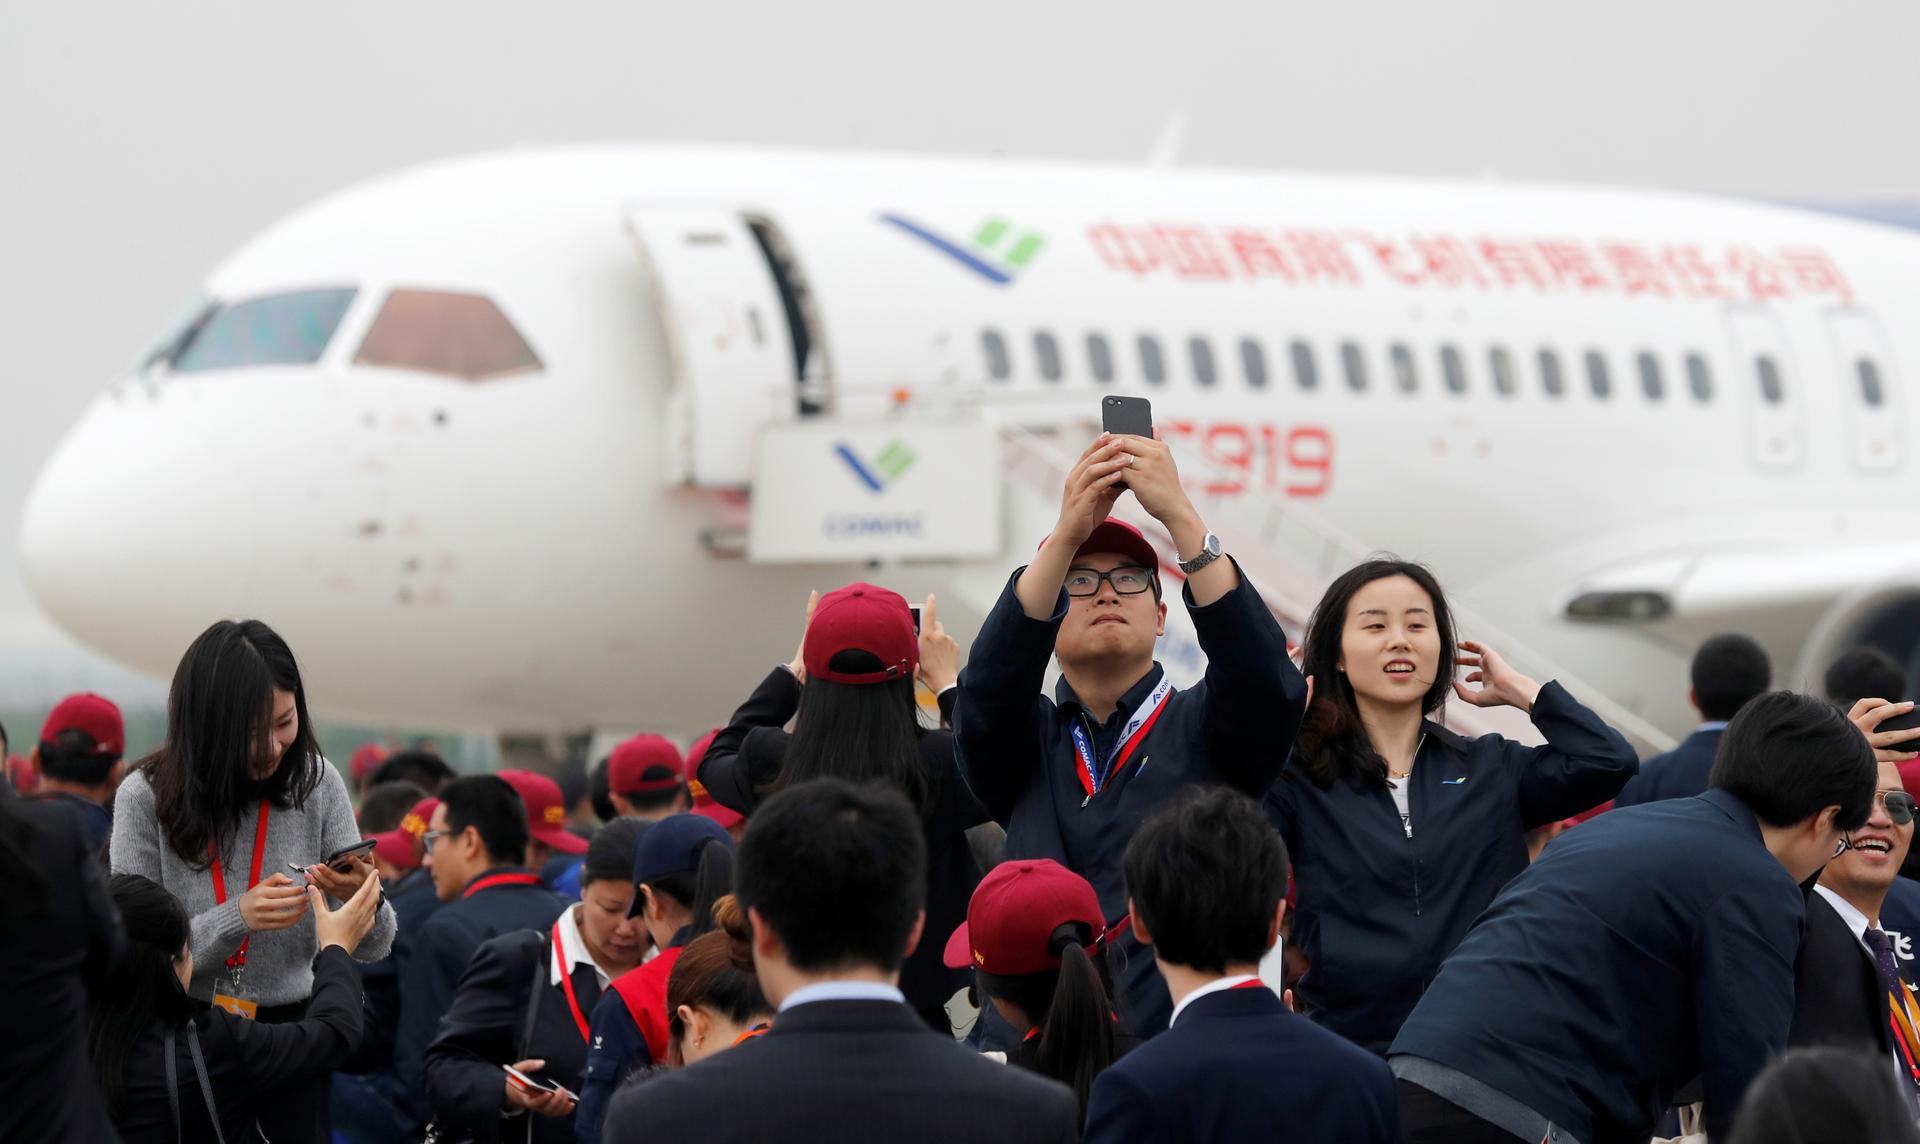 Attendees take photos in front of a Chinese C919 passenger jet after its first flight at Pudong International Airport in Shanghai.